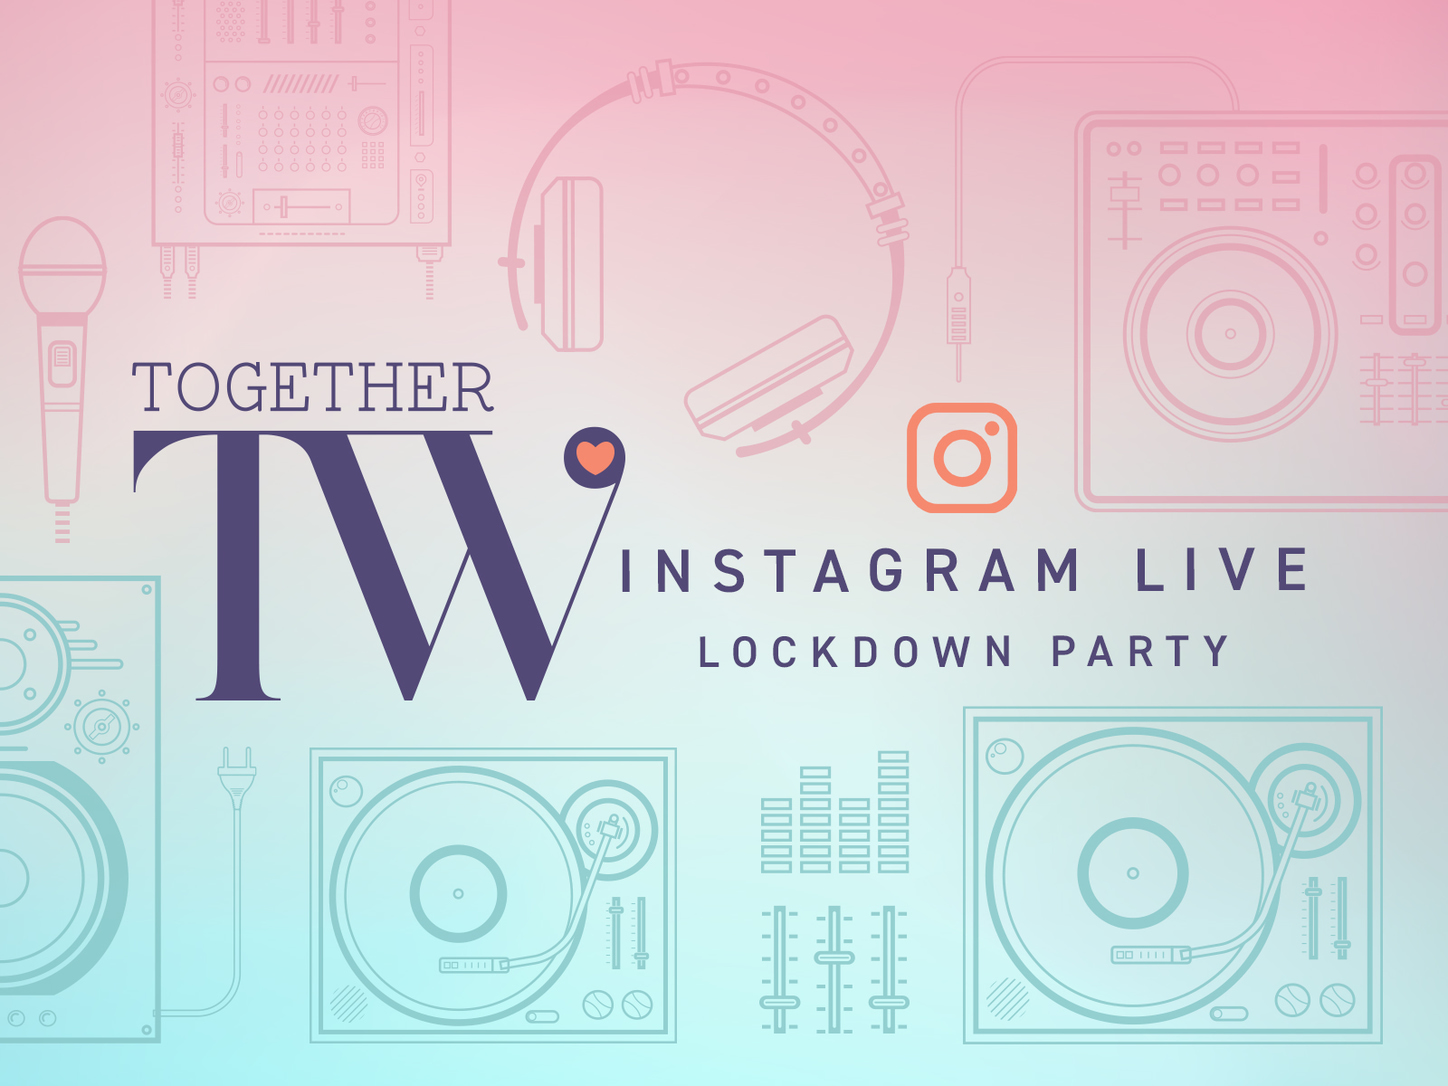 Announcing the TW Together Instagram Live Lockdown Party Lineup for Friday, May 22